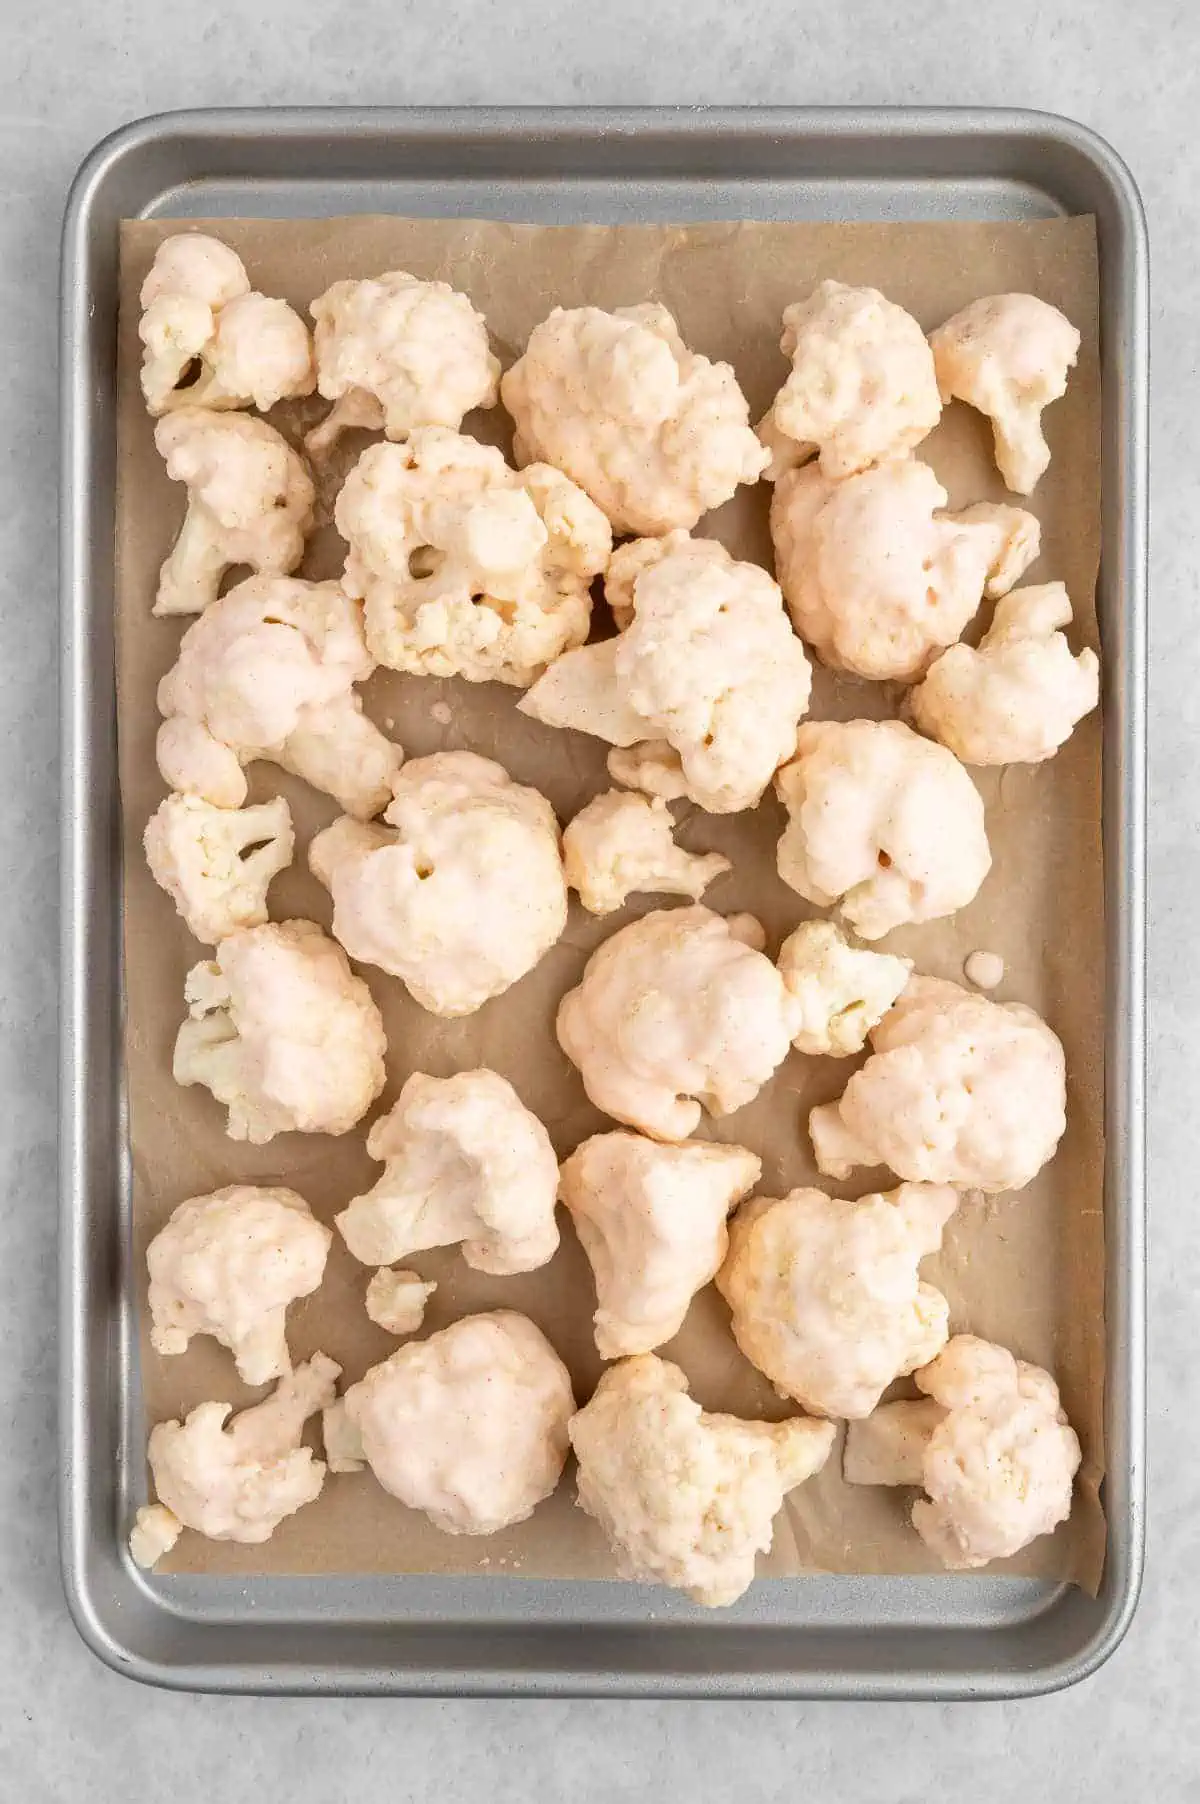 Buffalo cauliflower dipped in batter and arranged on baking tray.